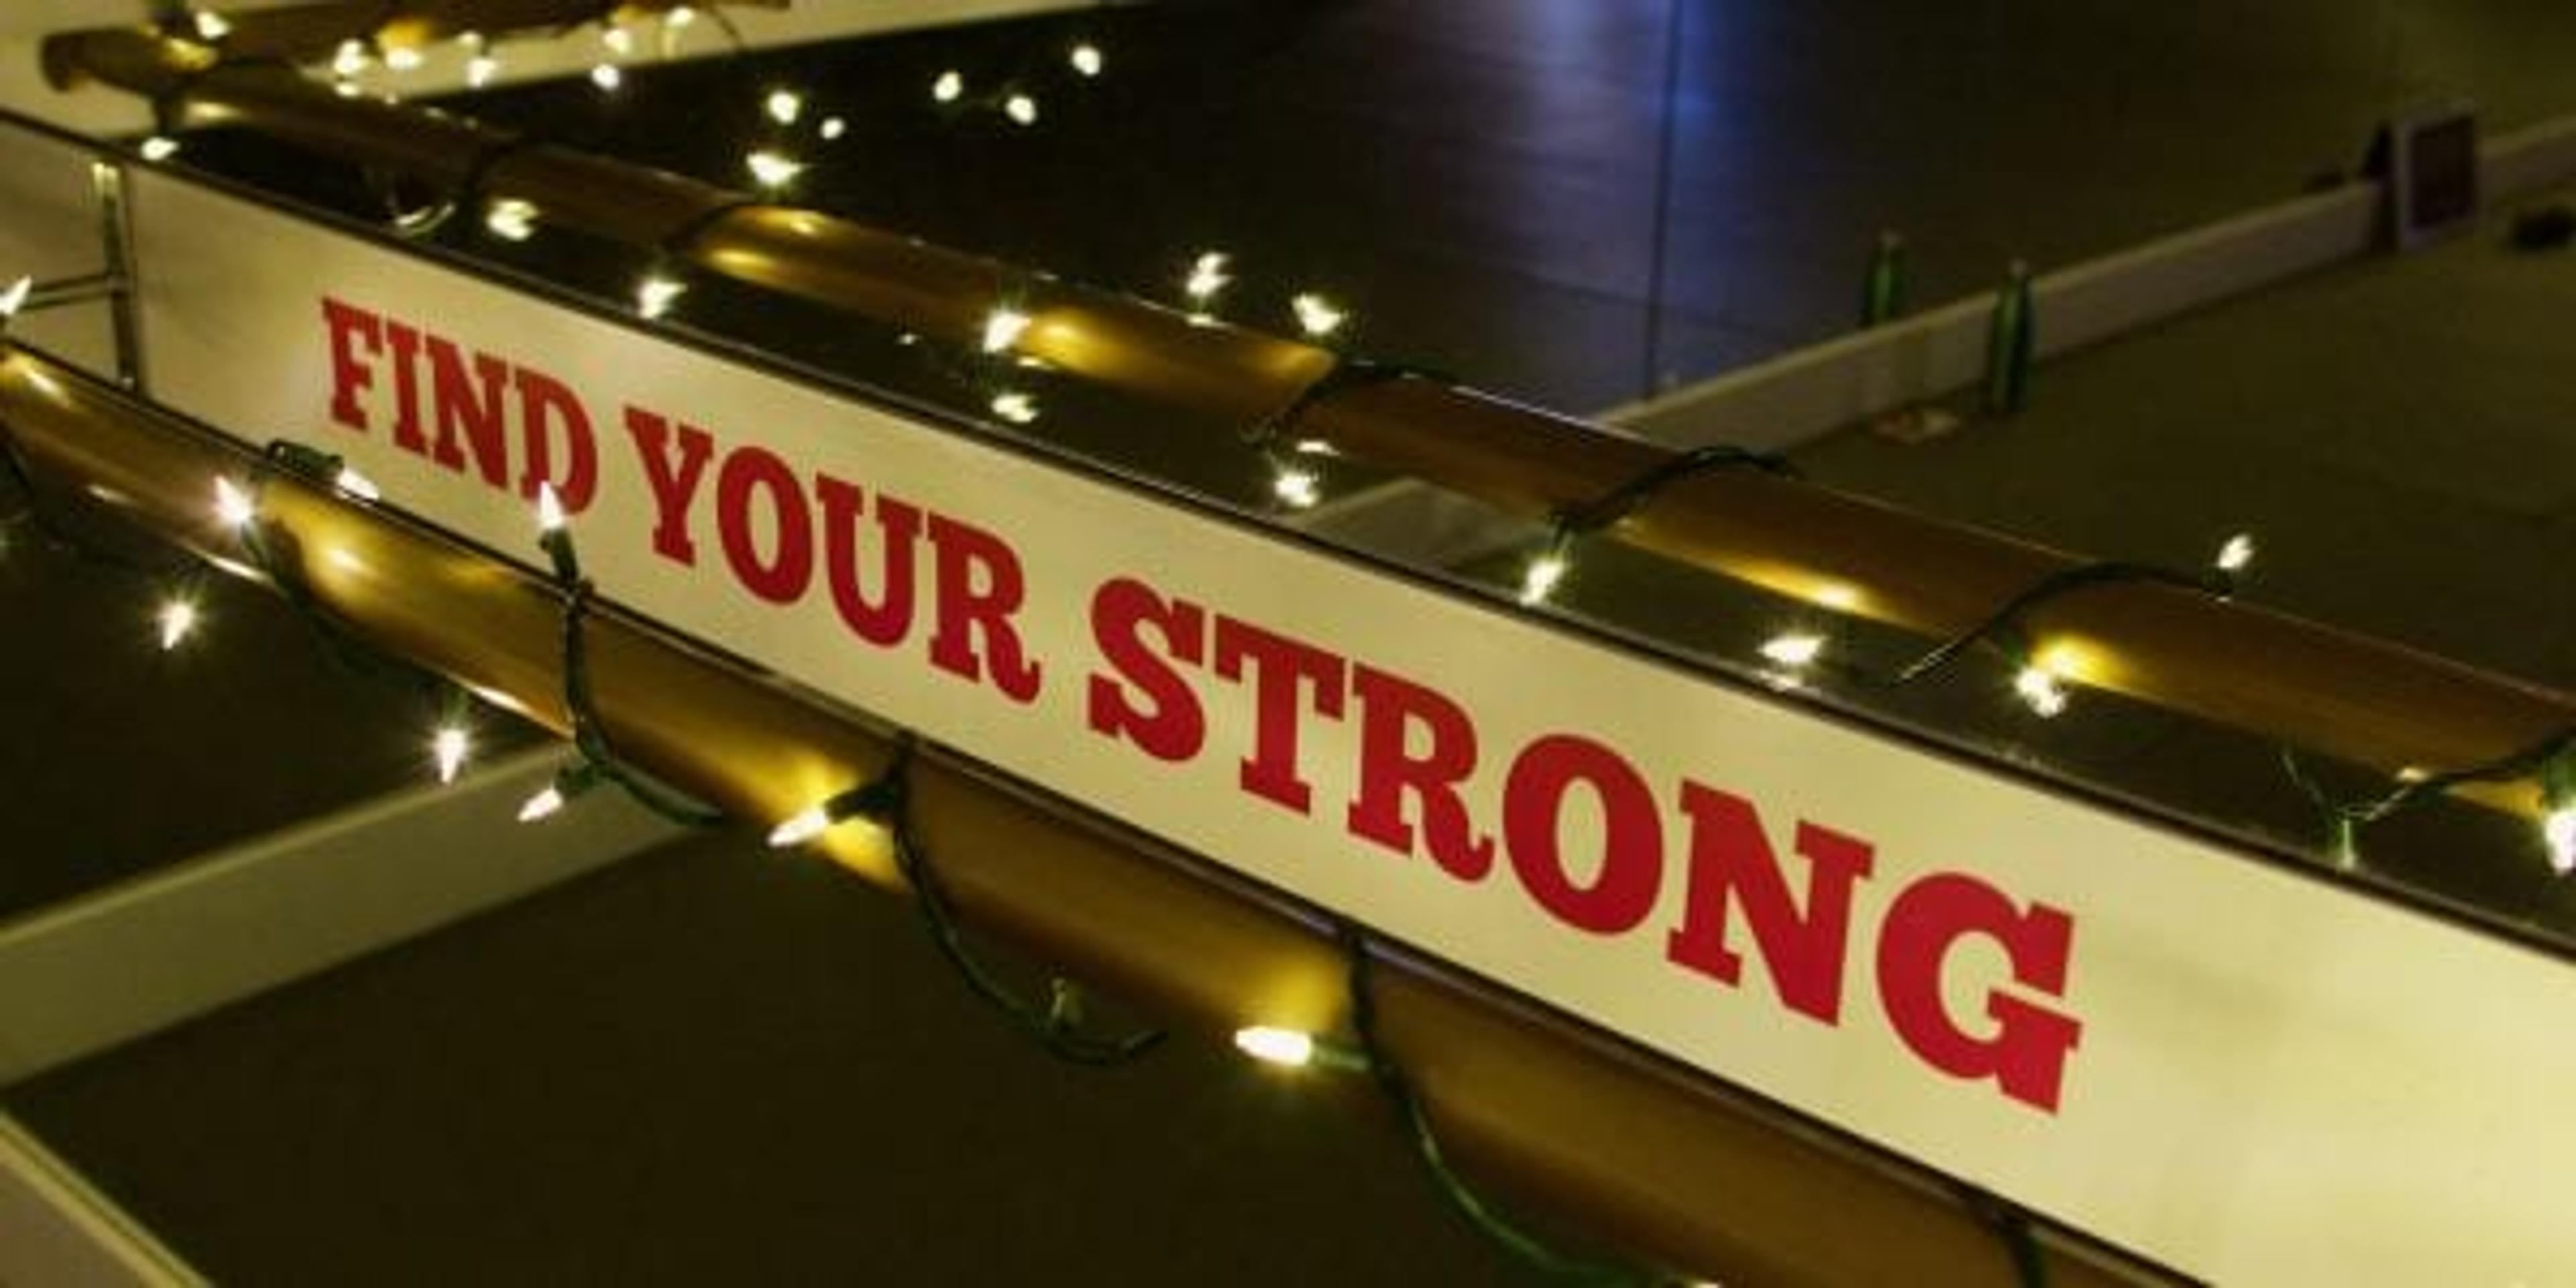 Image of sign that says "Find Your Strong"